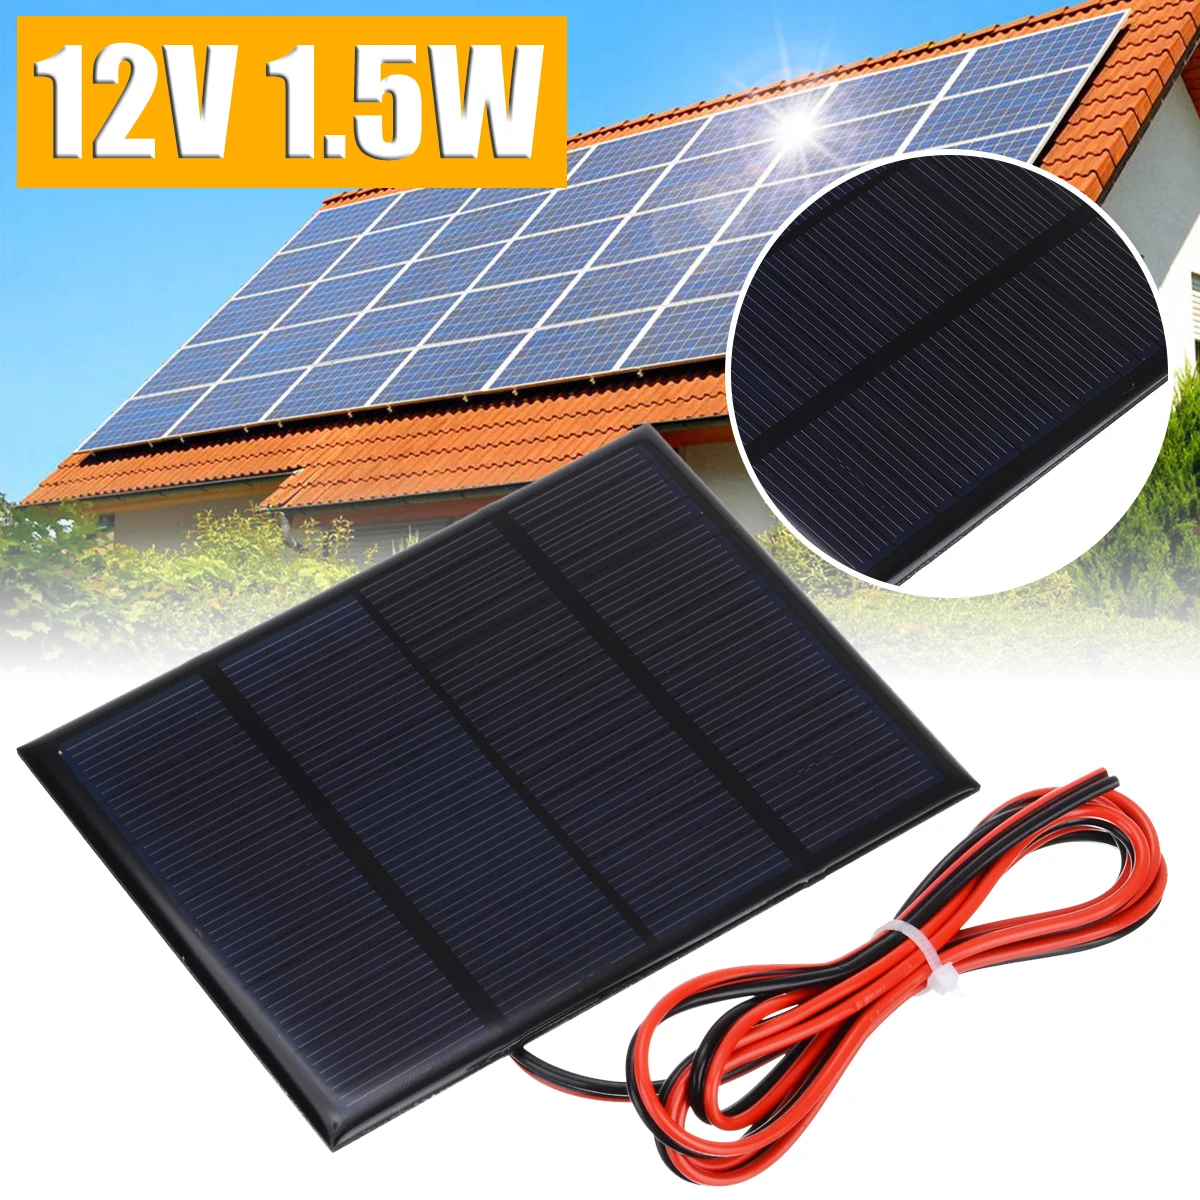 Universal 5V 0.2/0.5/1/1.2/1.5W Solar Panel Module for Cell Charger DIY fa#21 